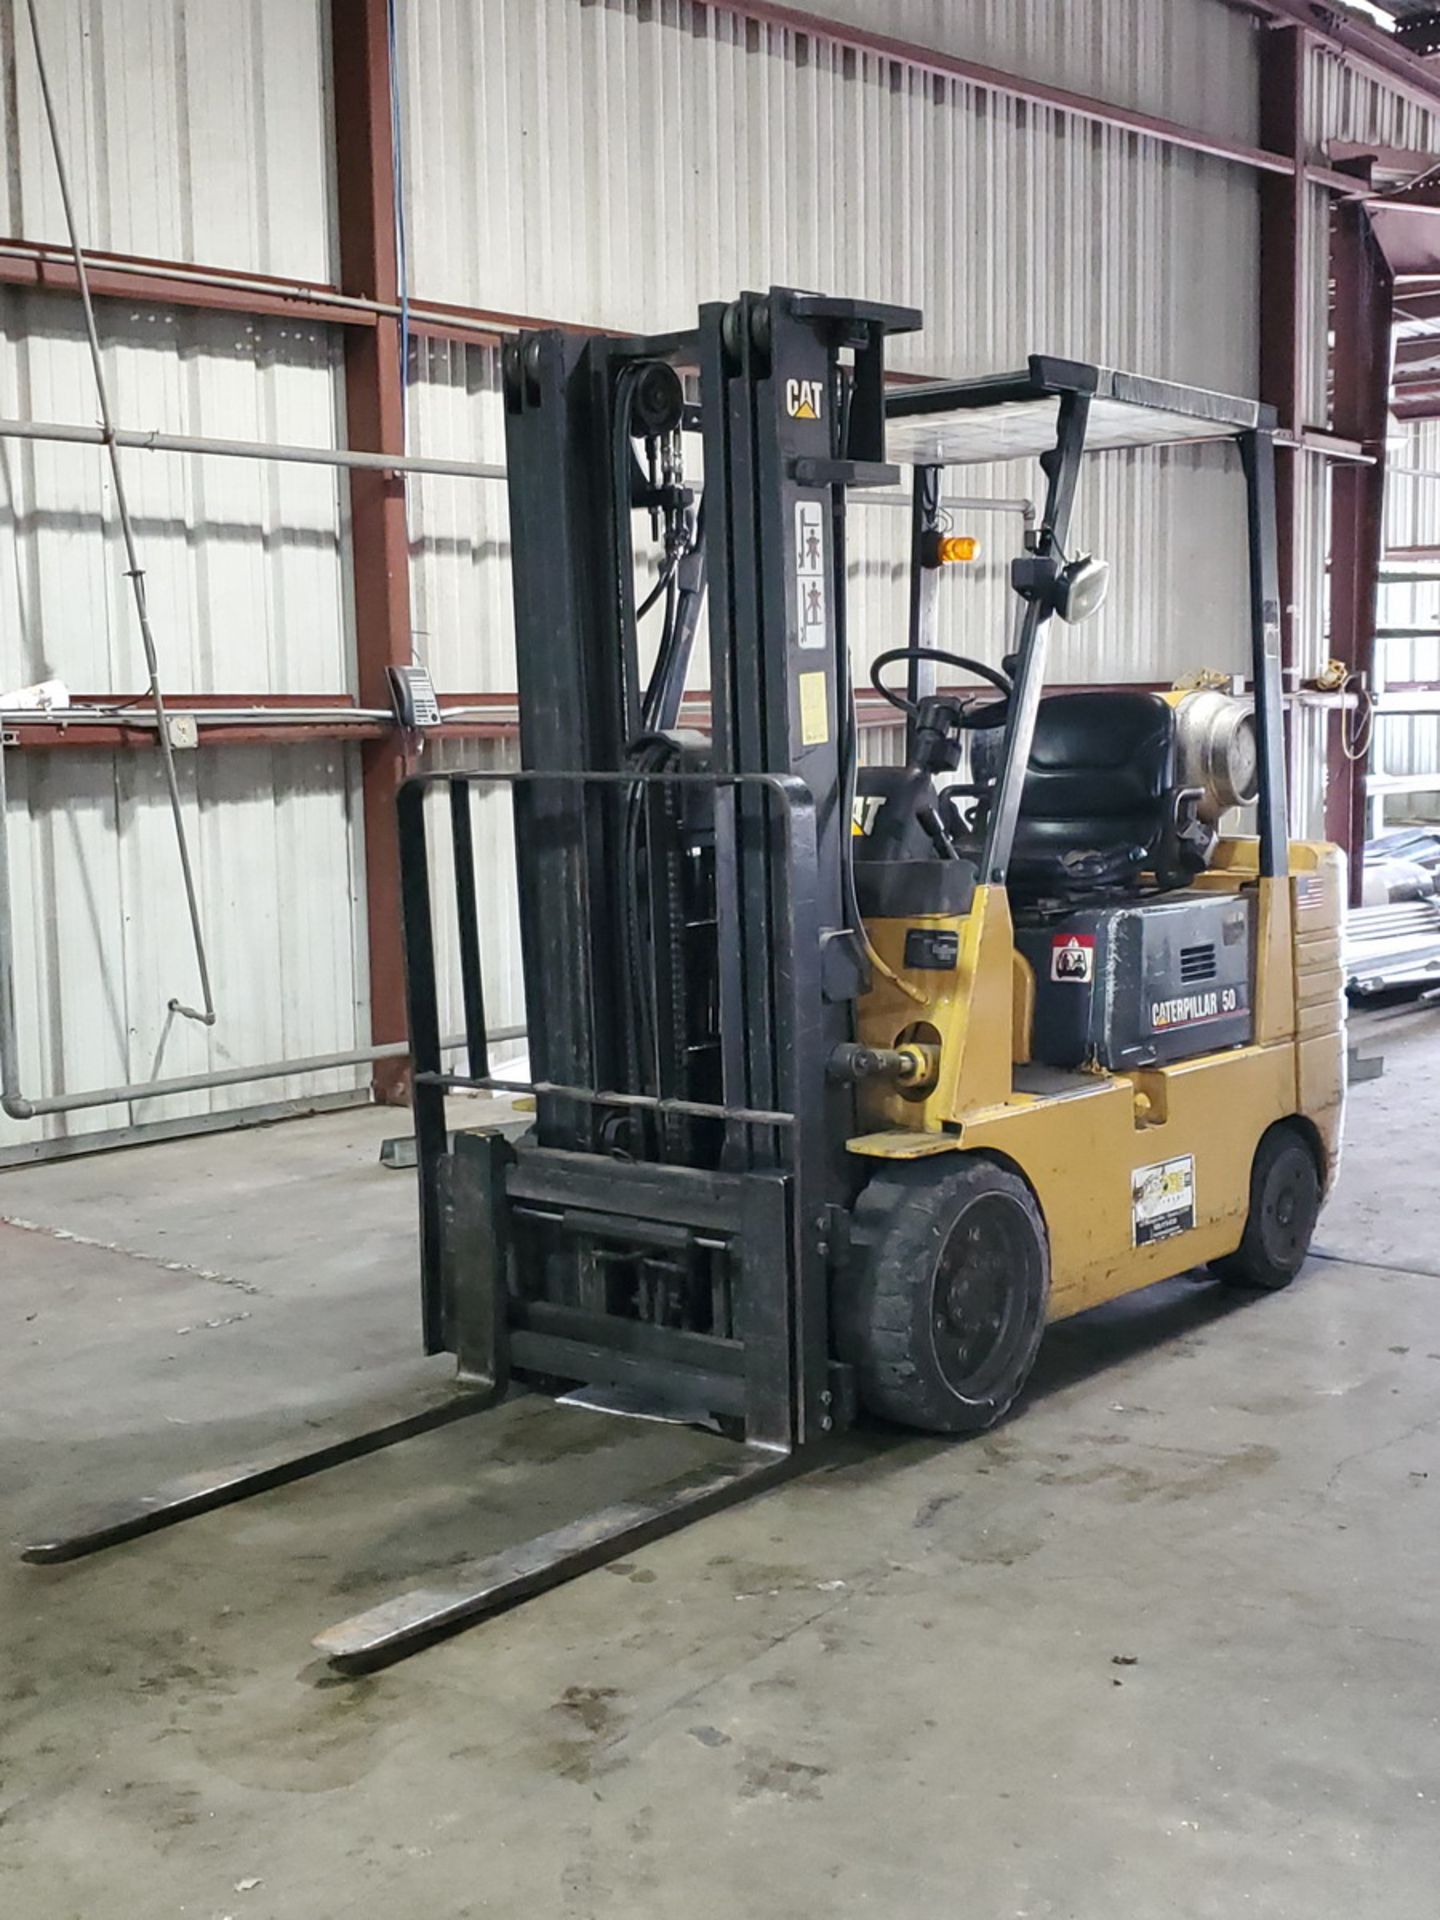 CAT GC25 LP Forklift 4,350Cap., 3-Stage Mast, 42" Forks, 5,374hrs, 190" Lift Height